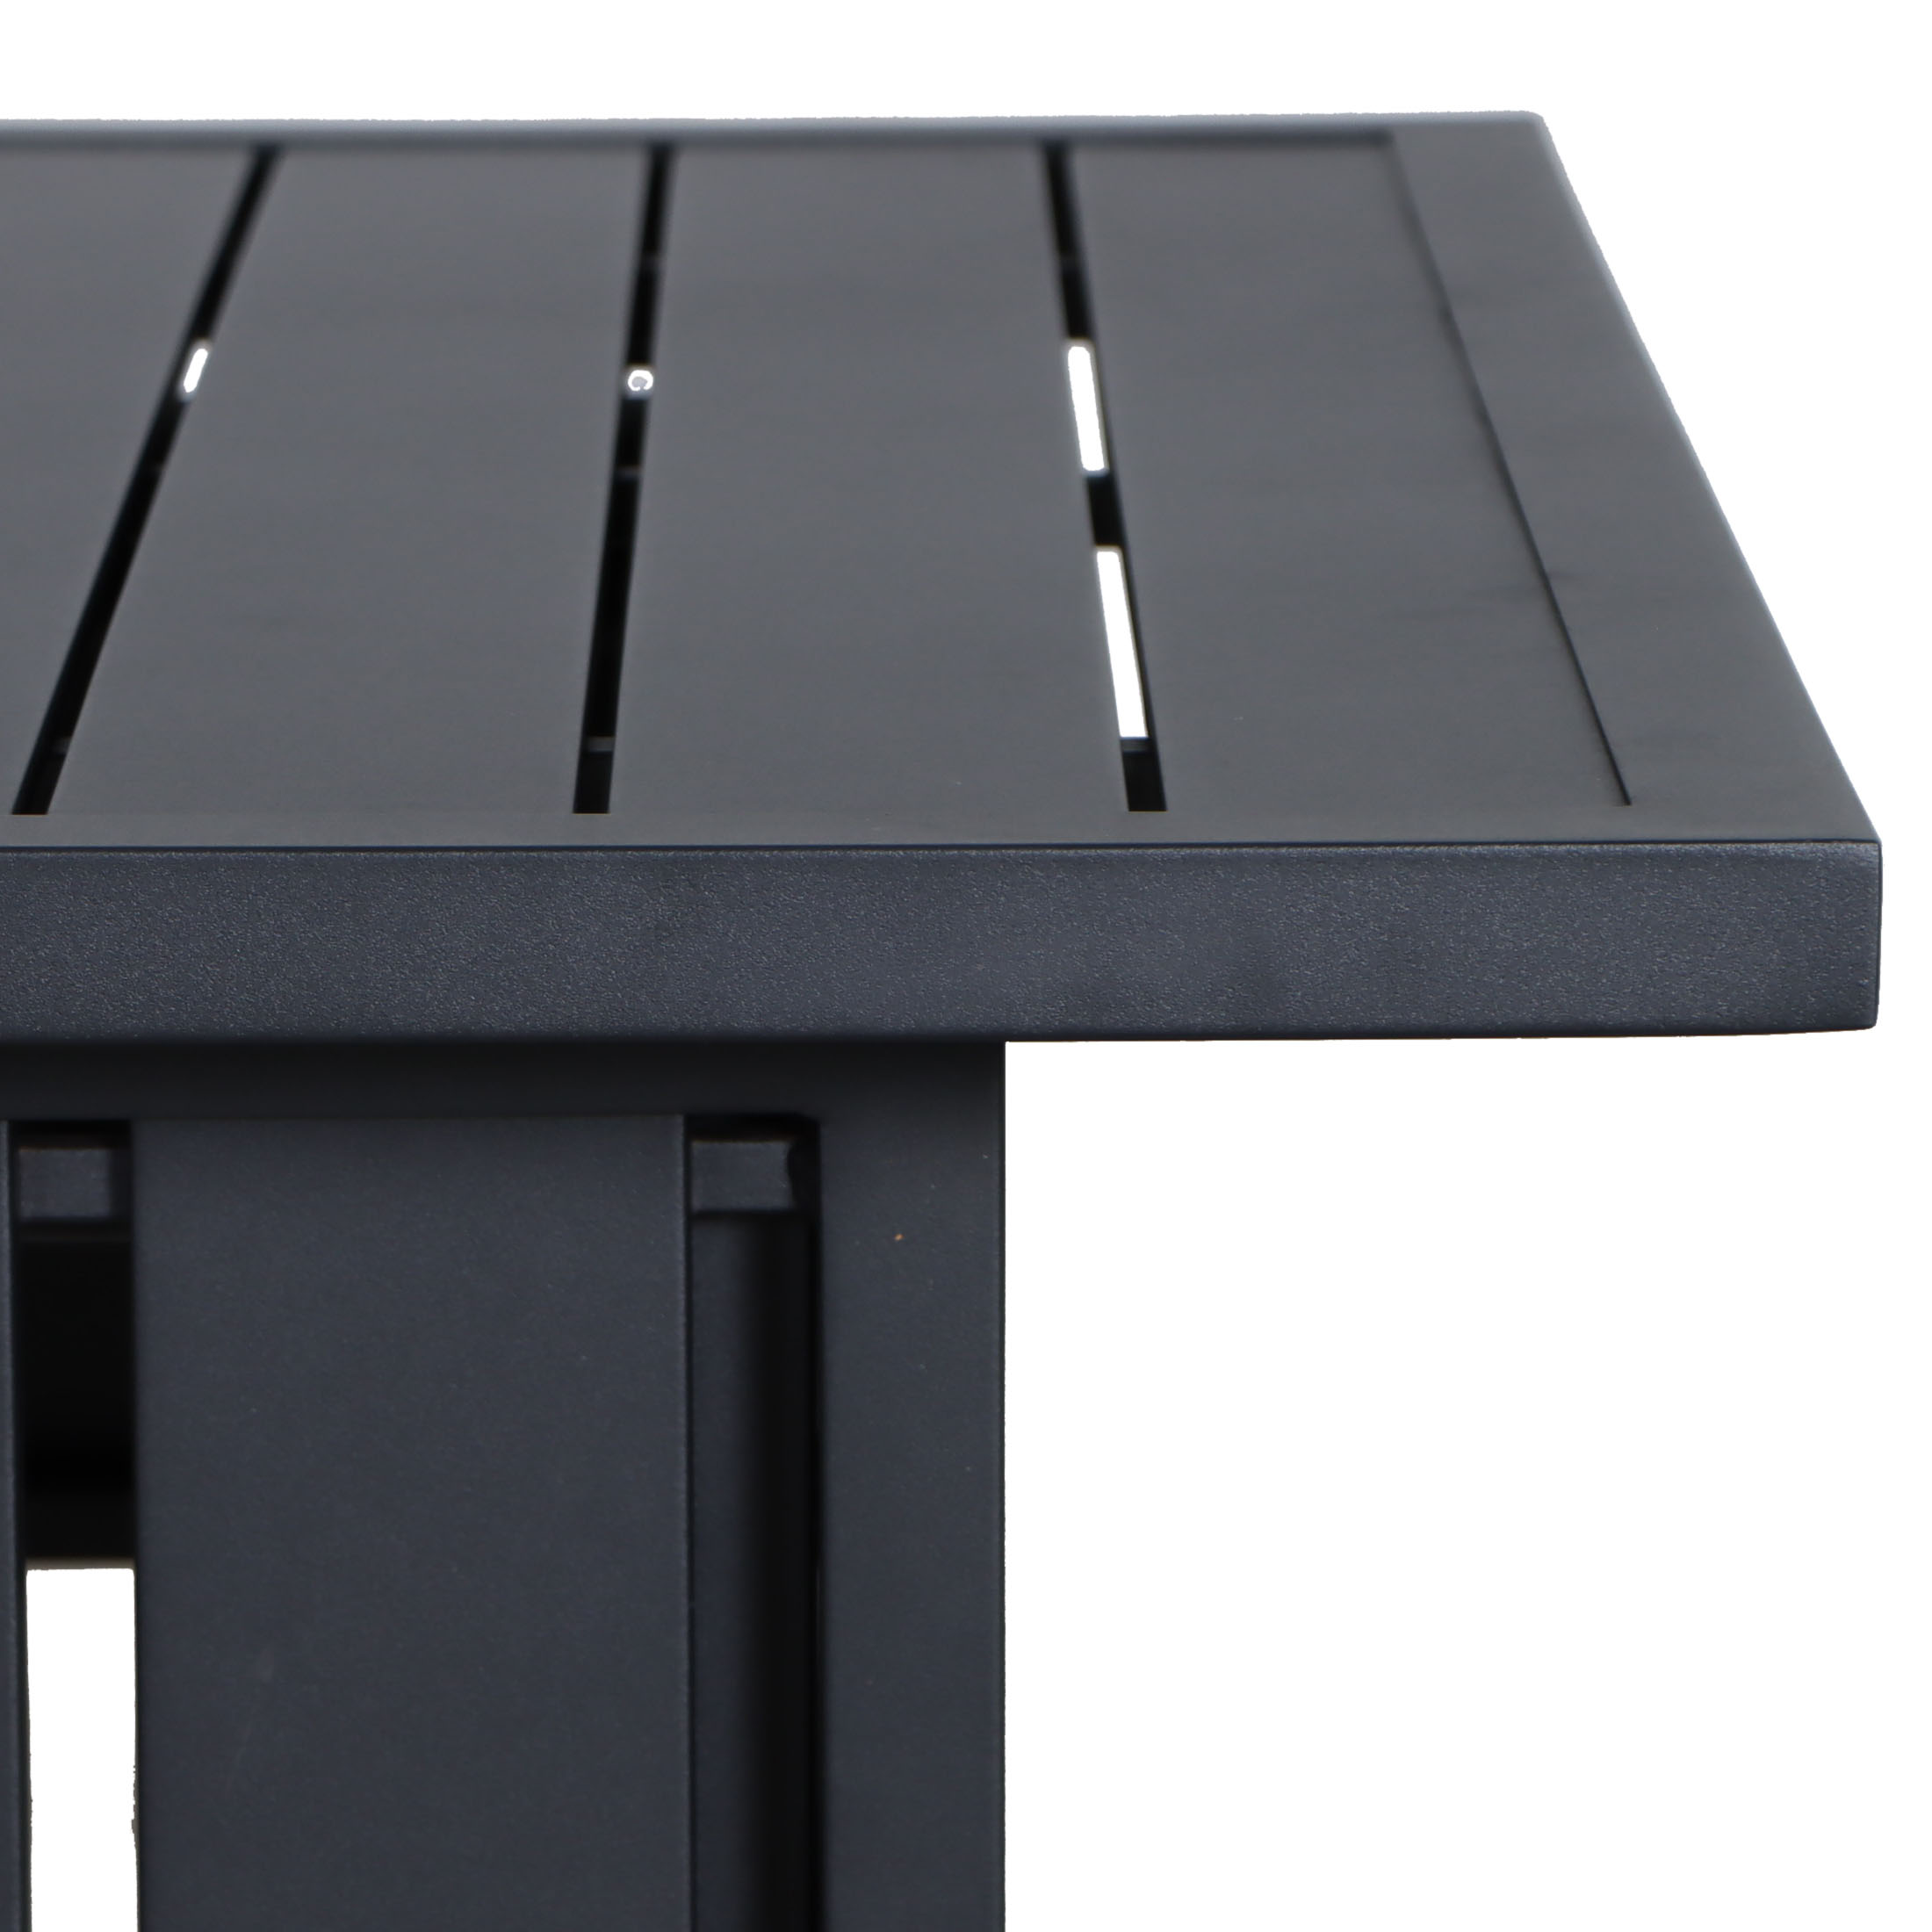 Mainstays Asher Springs Adjustable Rectangular Steel Outdoor Table - image 5 of 9